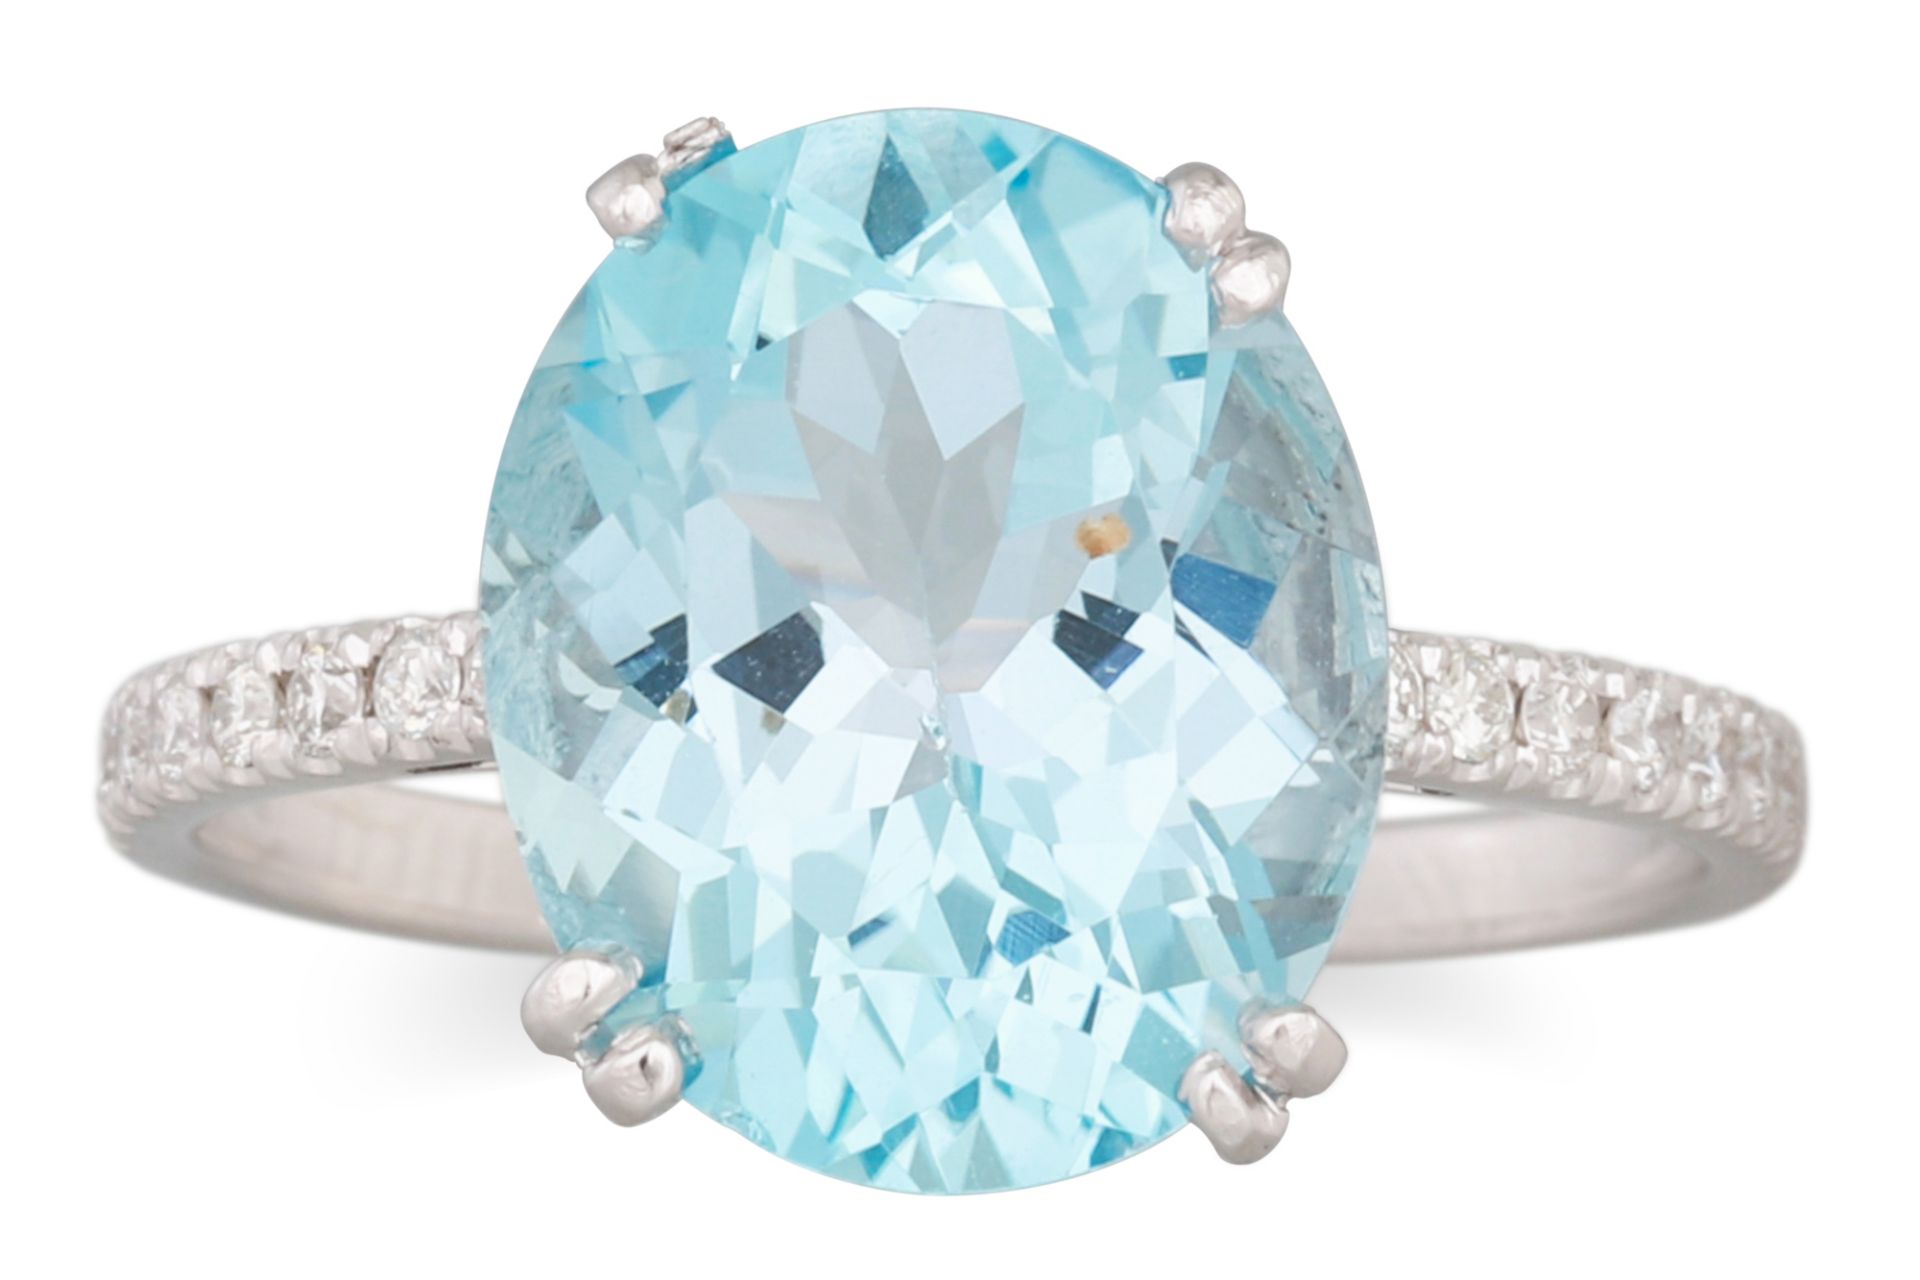 A TOPAZ AND DIAMOND RING, the oval topaz to diamond shoulders, mounted in white gold, size M - N